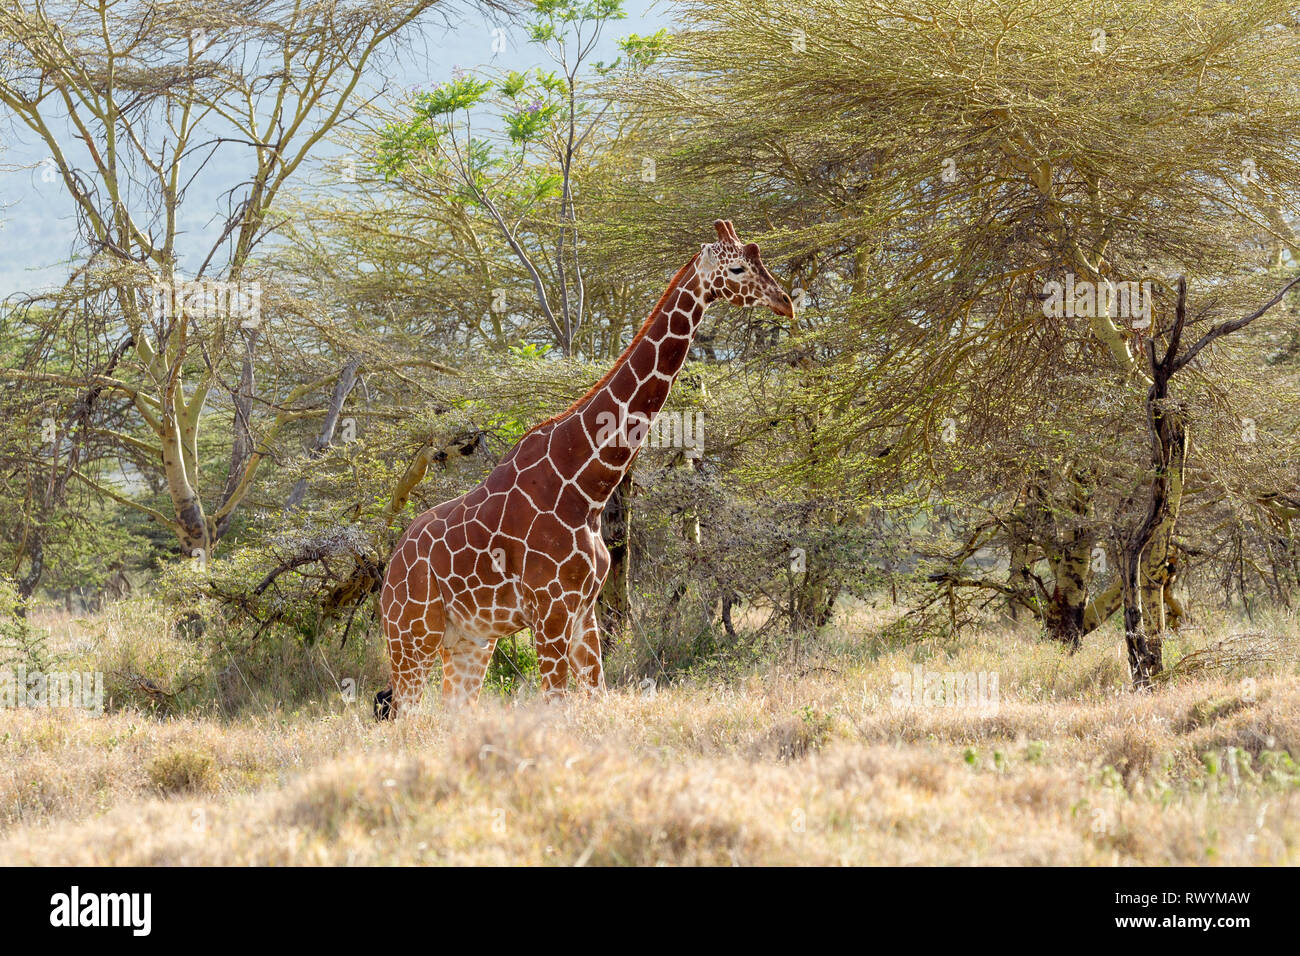 A single adult Reticulated giraffe browsing in the canopy, landscape format, Lewa Wilderness, Lewa Conservancy, Kenya, Africa Stock Photo